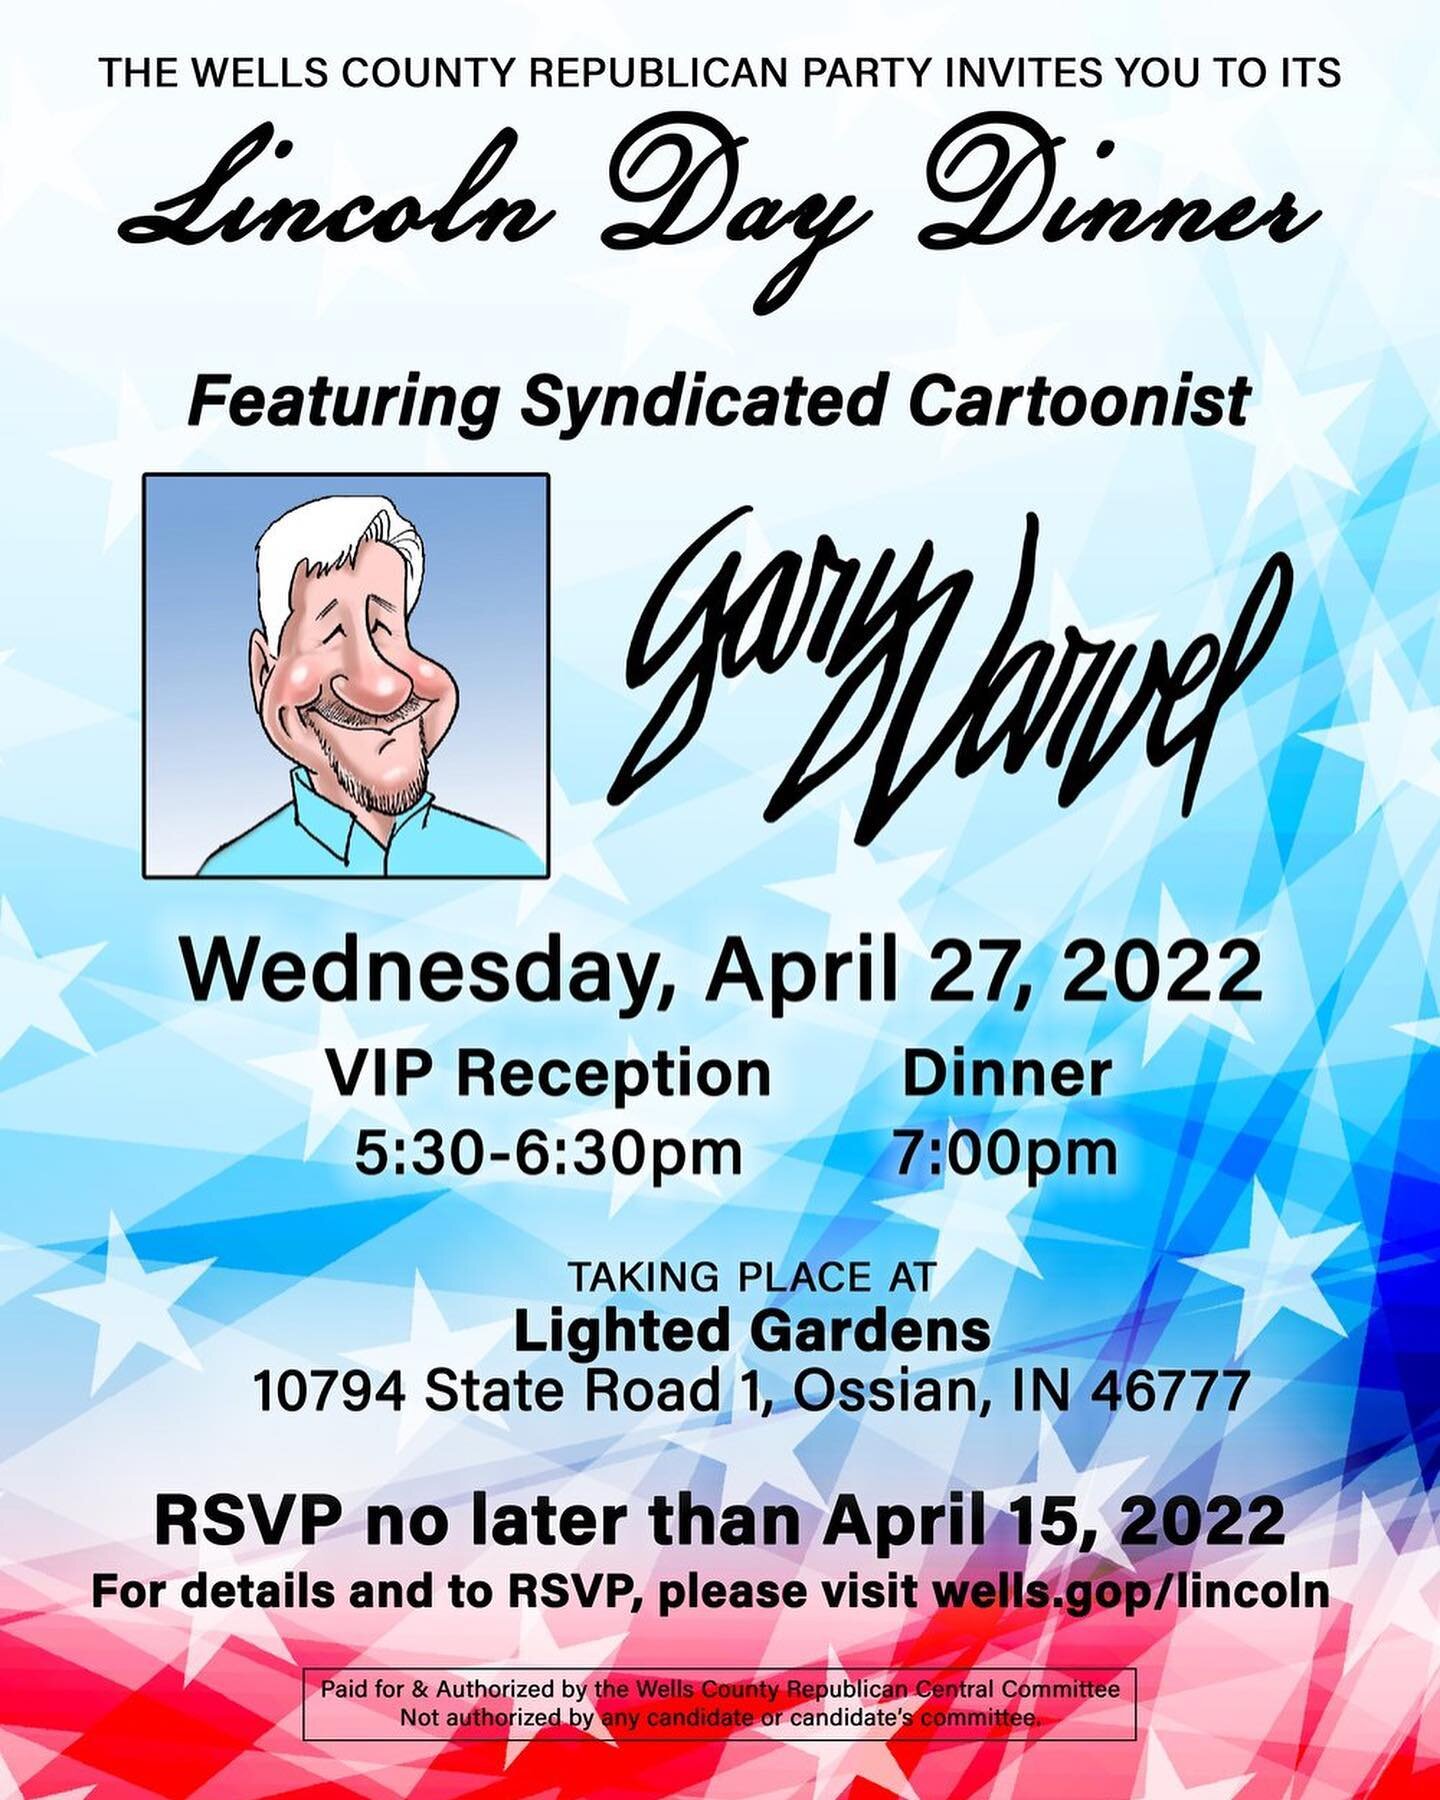 Time is running out! Have you RSVPed for the Lincoln Day Dinner yet? Reservations are due by April 15 so make your reservations today at www.wells.gop/lincoln